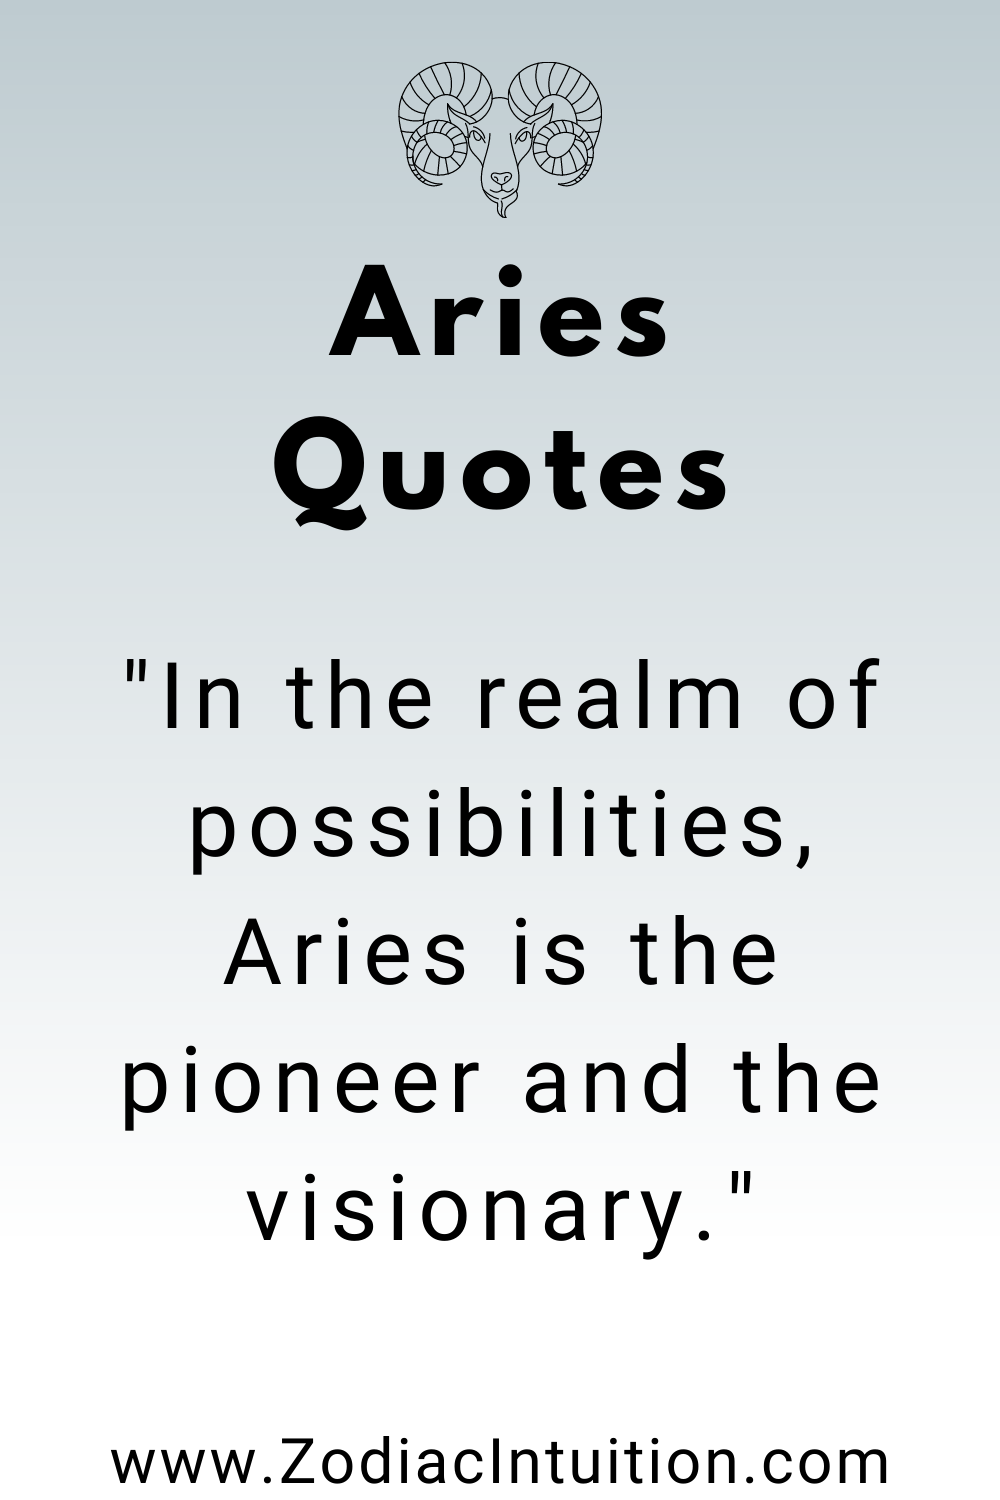 Top 5 Aries Quotes And Inspiration